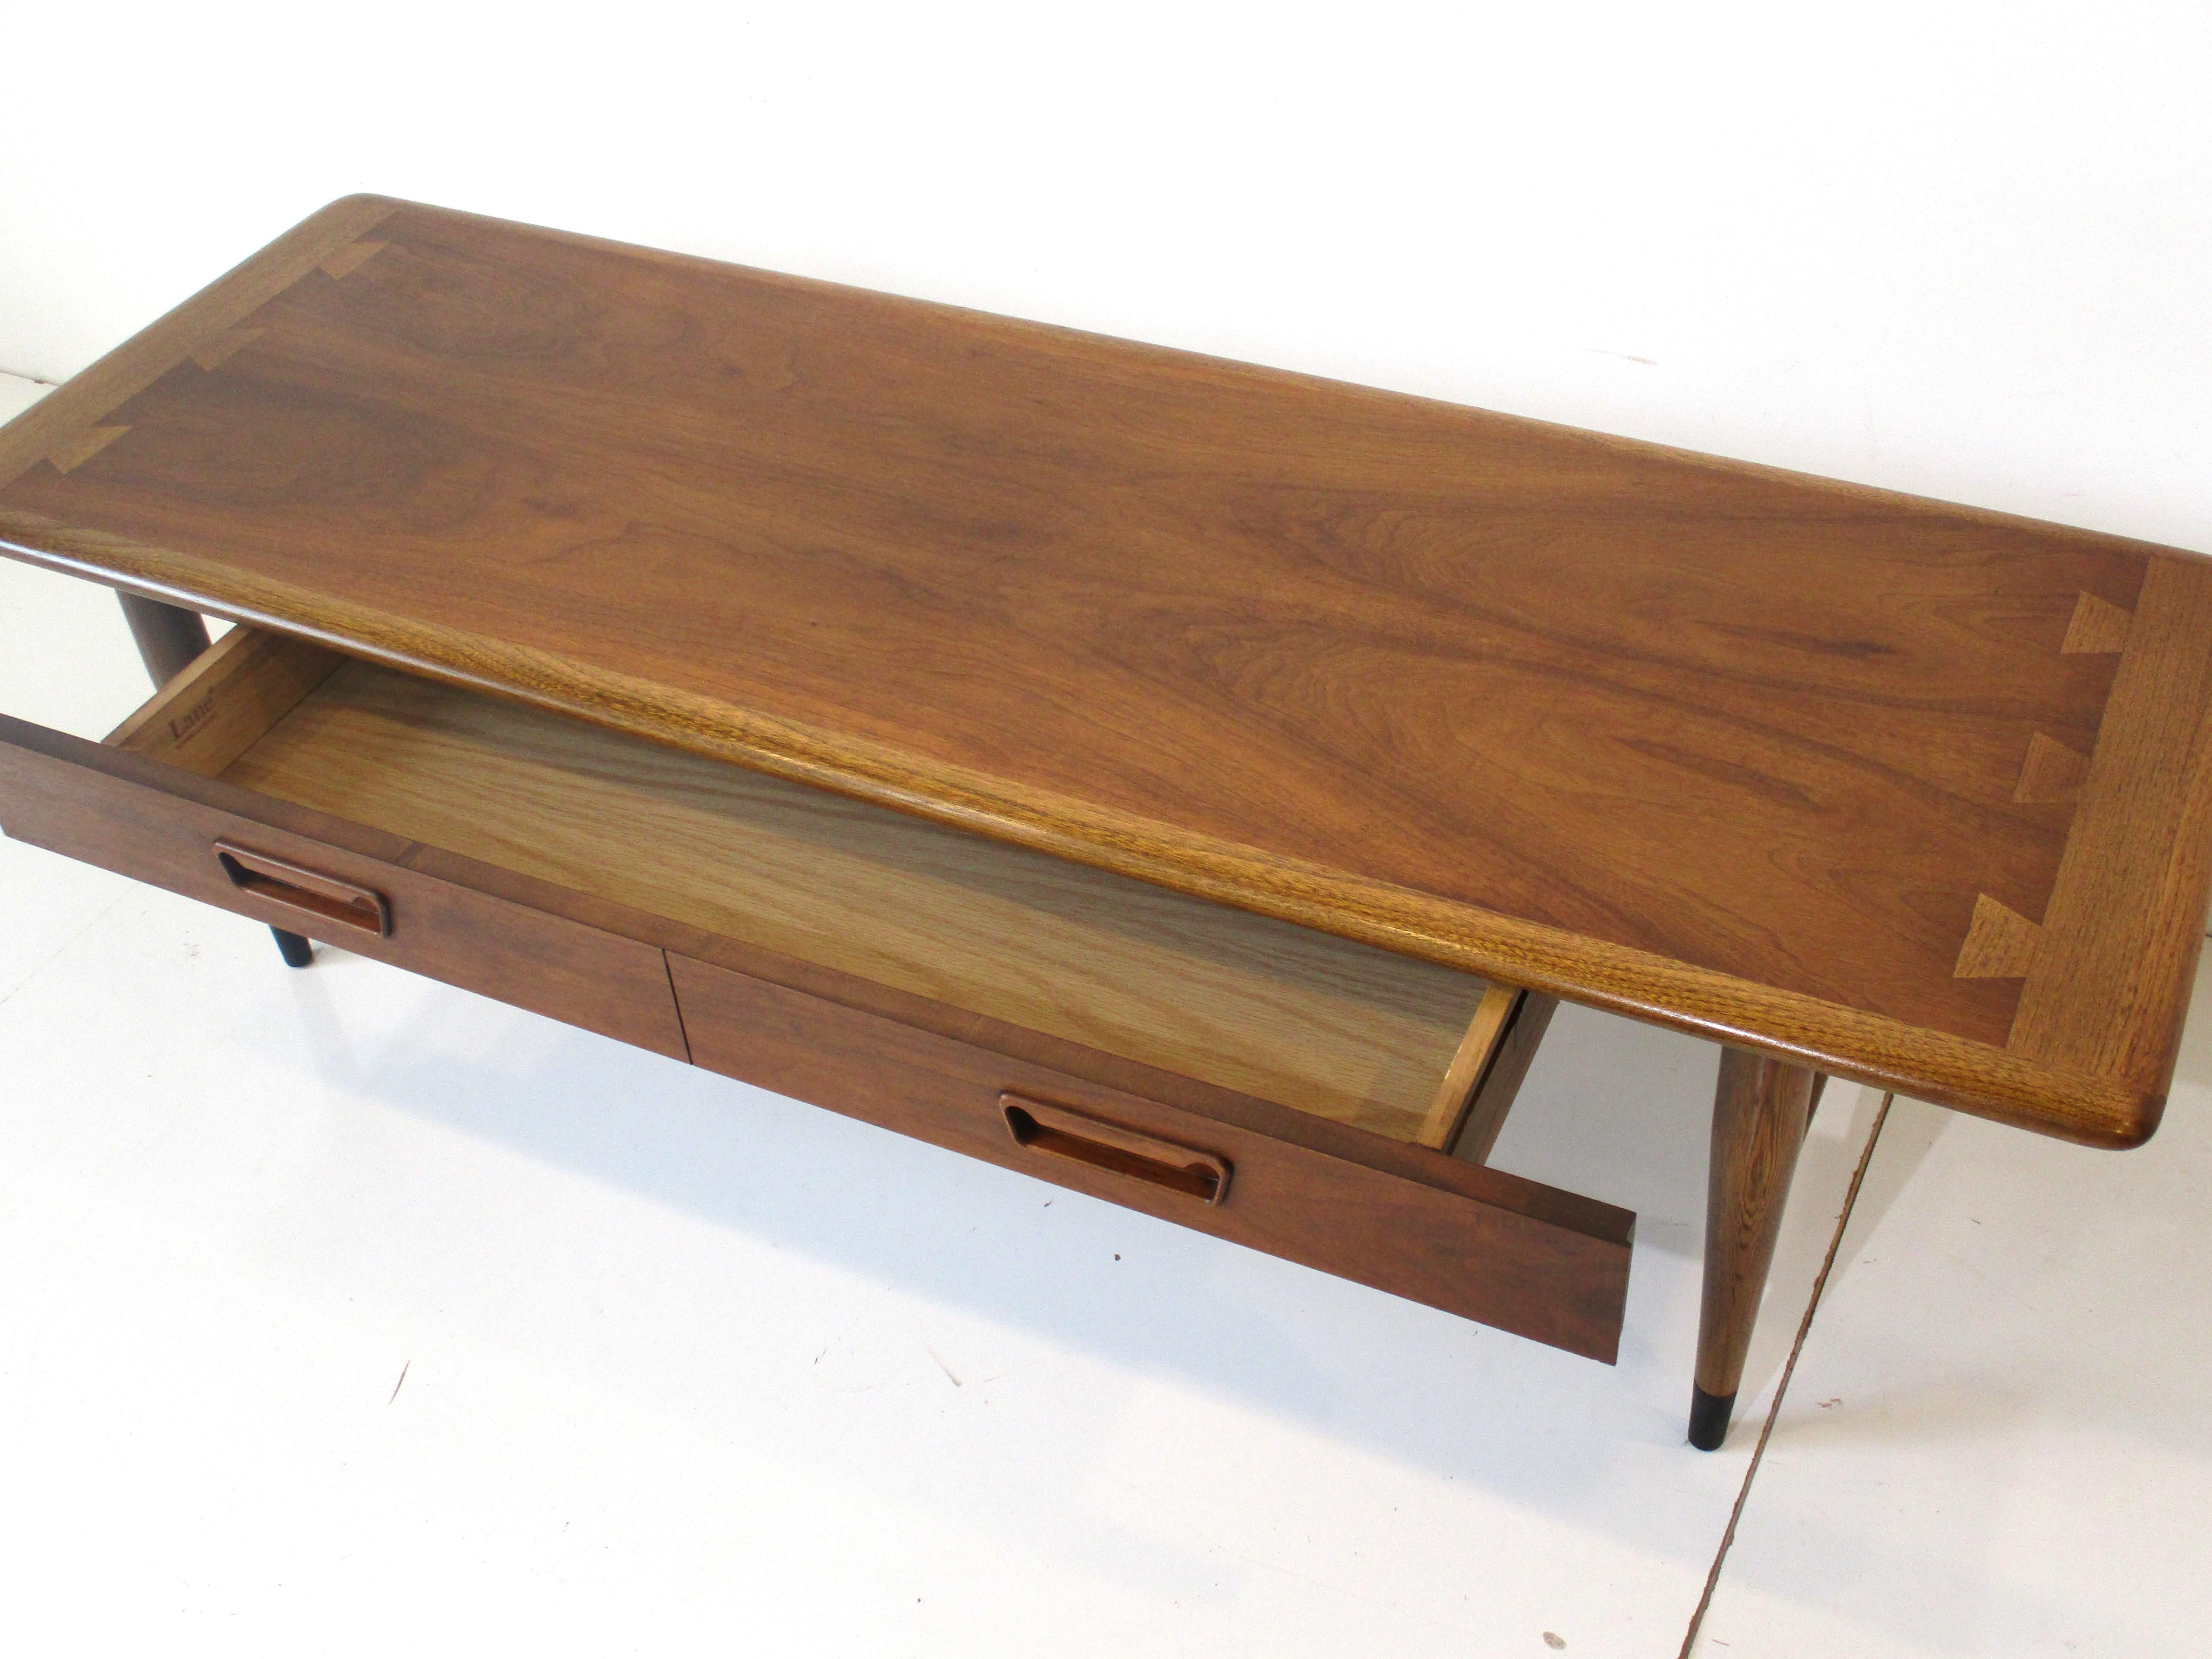 20th Century Acclaim Lane Dovetail Coffee Table with Drawer by Andre Bus